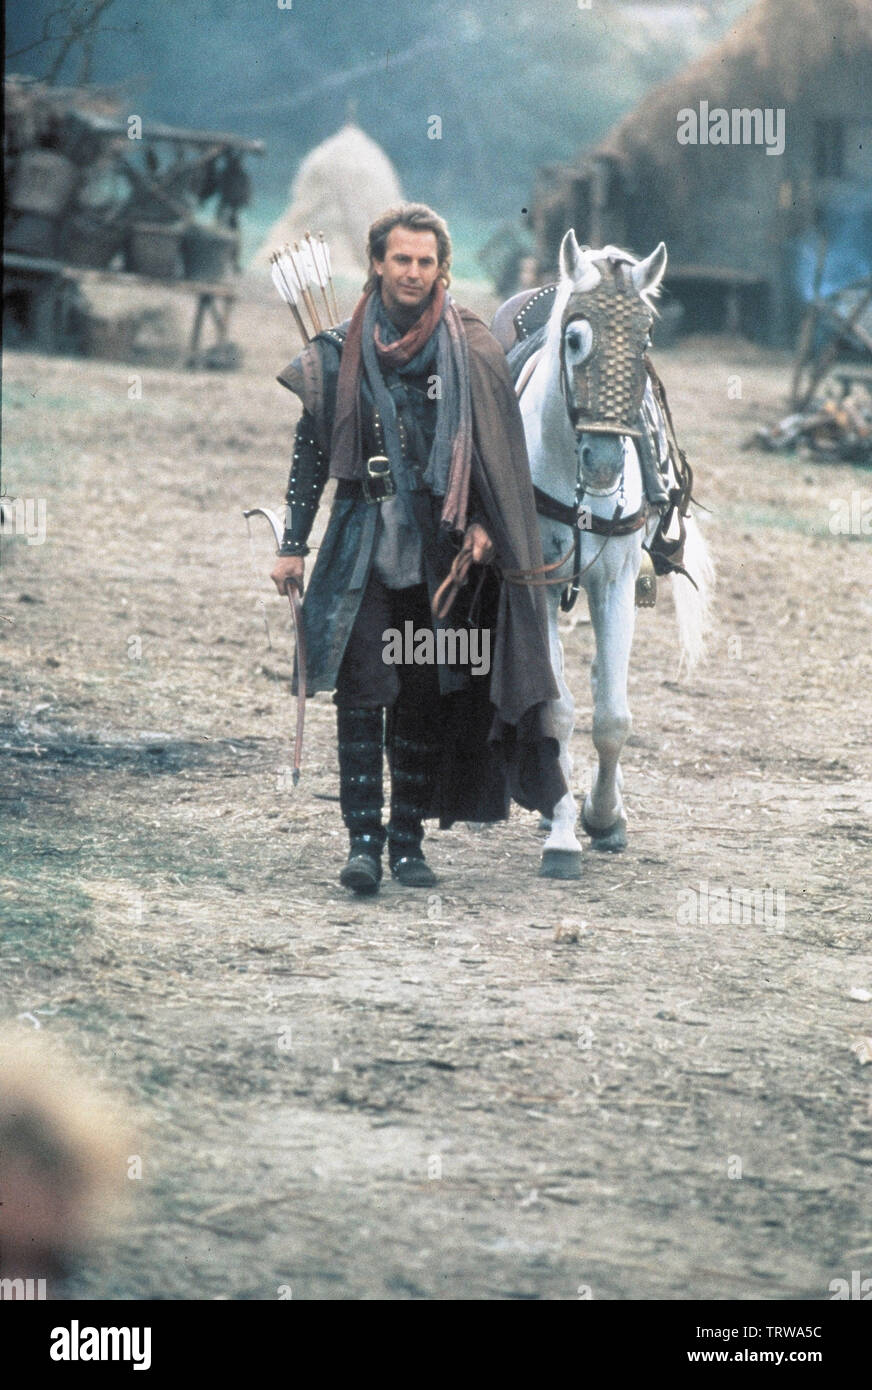 KEVIN COSTNER in ROBIN HOOD: PRINCE OF THIEVES (1991). Copyright: Editorial use only. No merchandising or book covers. This is a publicly distributed handout. Access rights only, no license of copyright provided. Only to be reproduced in conjunction with promotion of this film. Credit: WARNER BROTHERS / Album Stock Photo